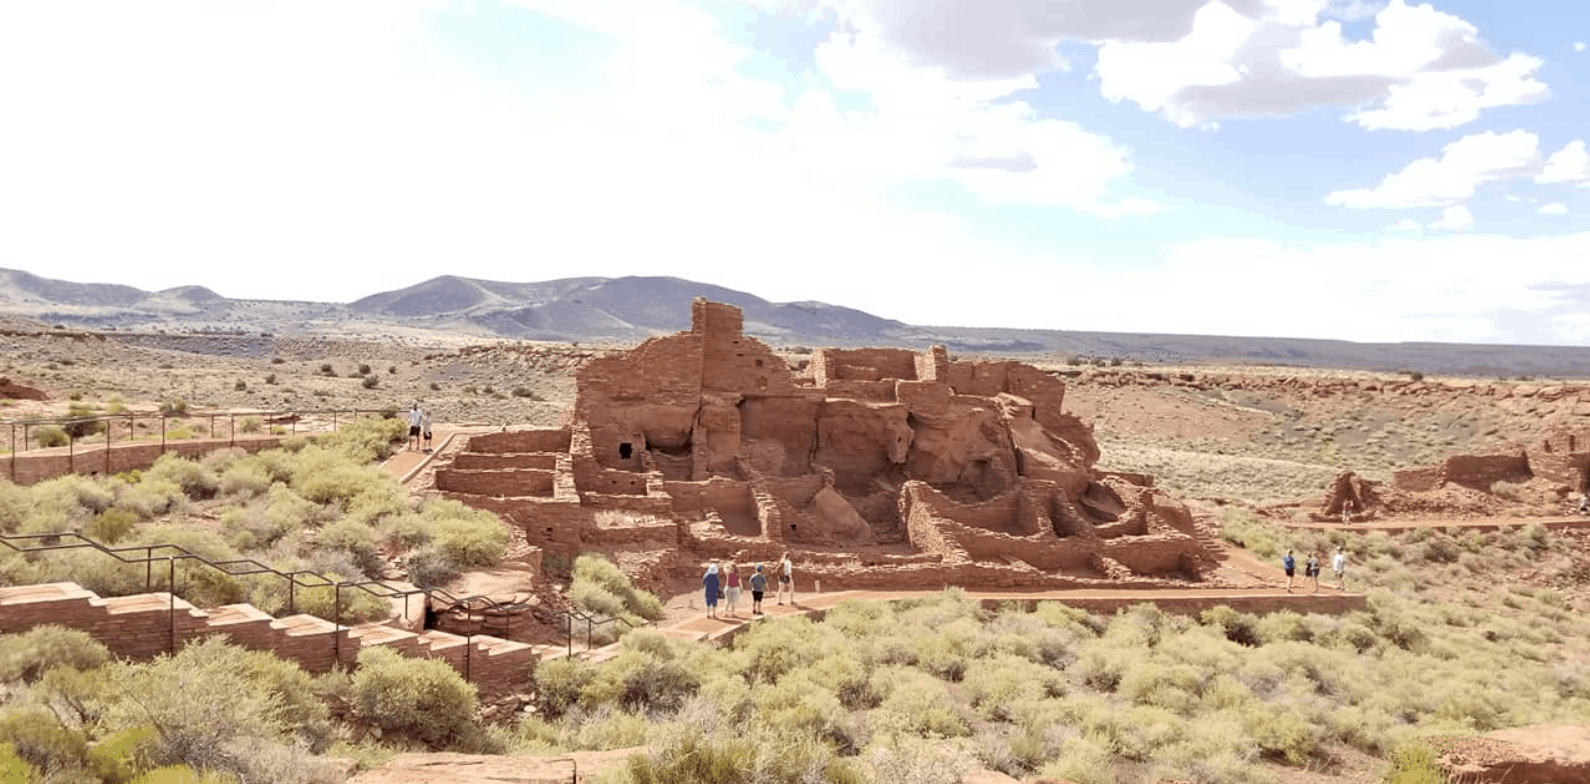 view of Wupatki National Monument